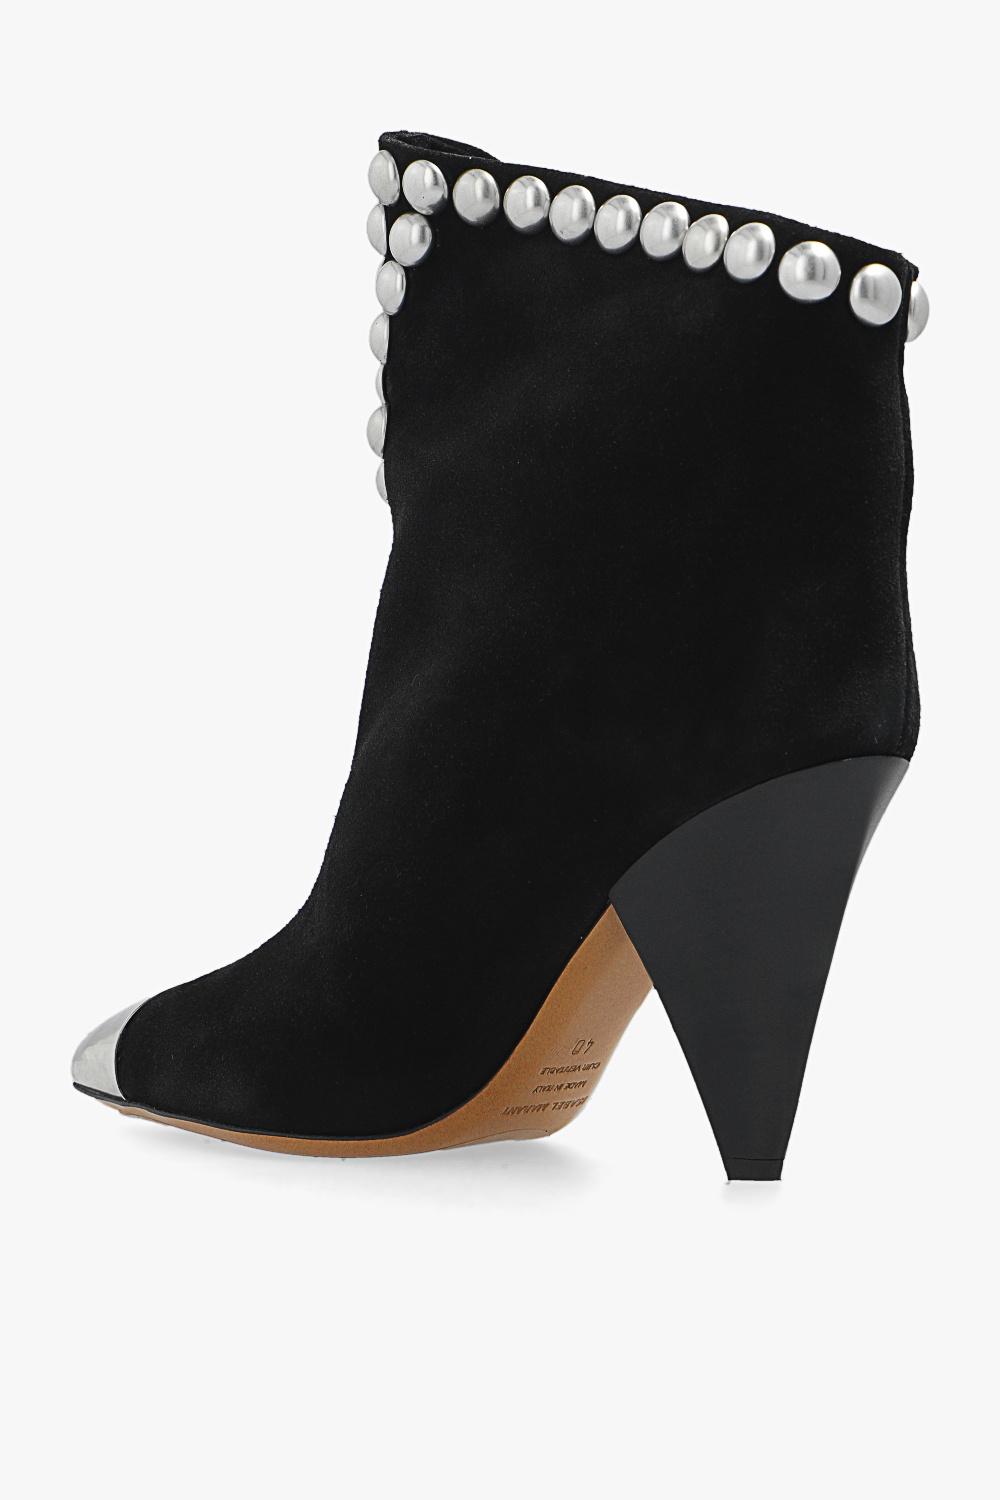 Isabel Marant 'lapio' Heeled Ankle Boots in Black | Lyst